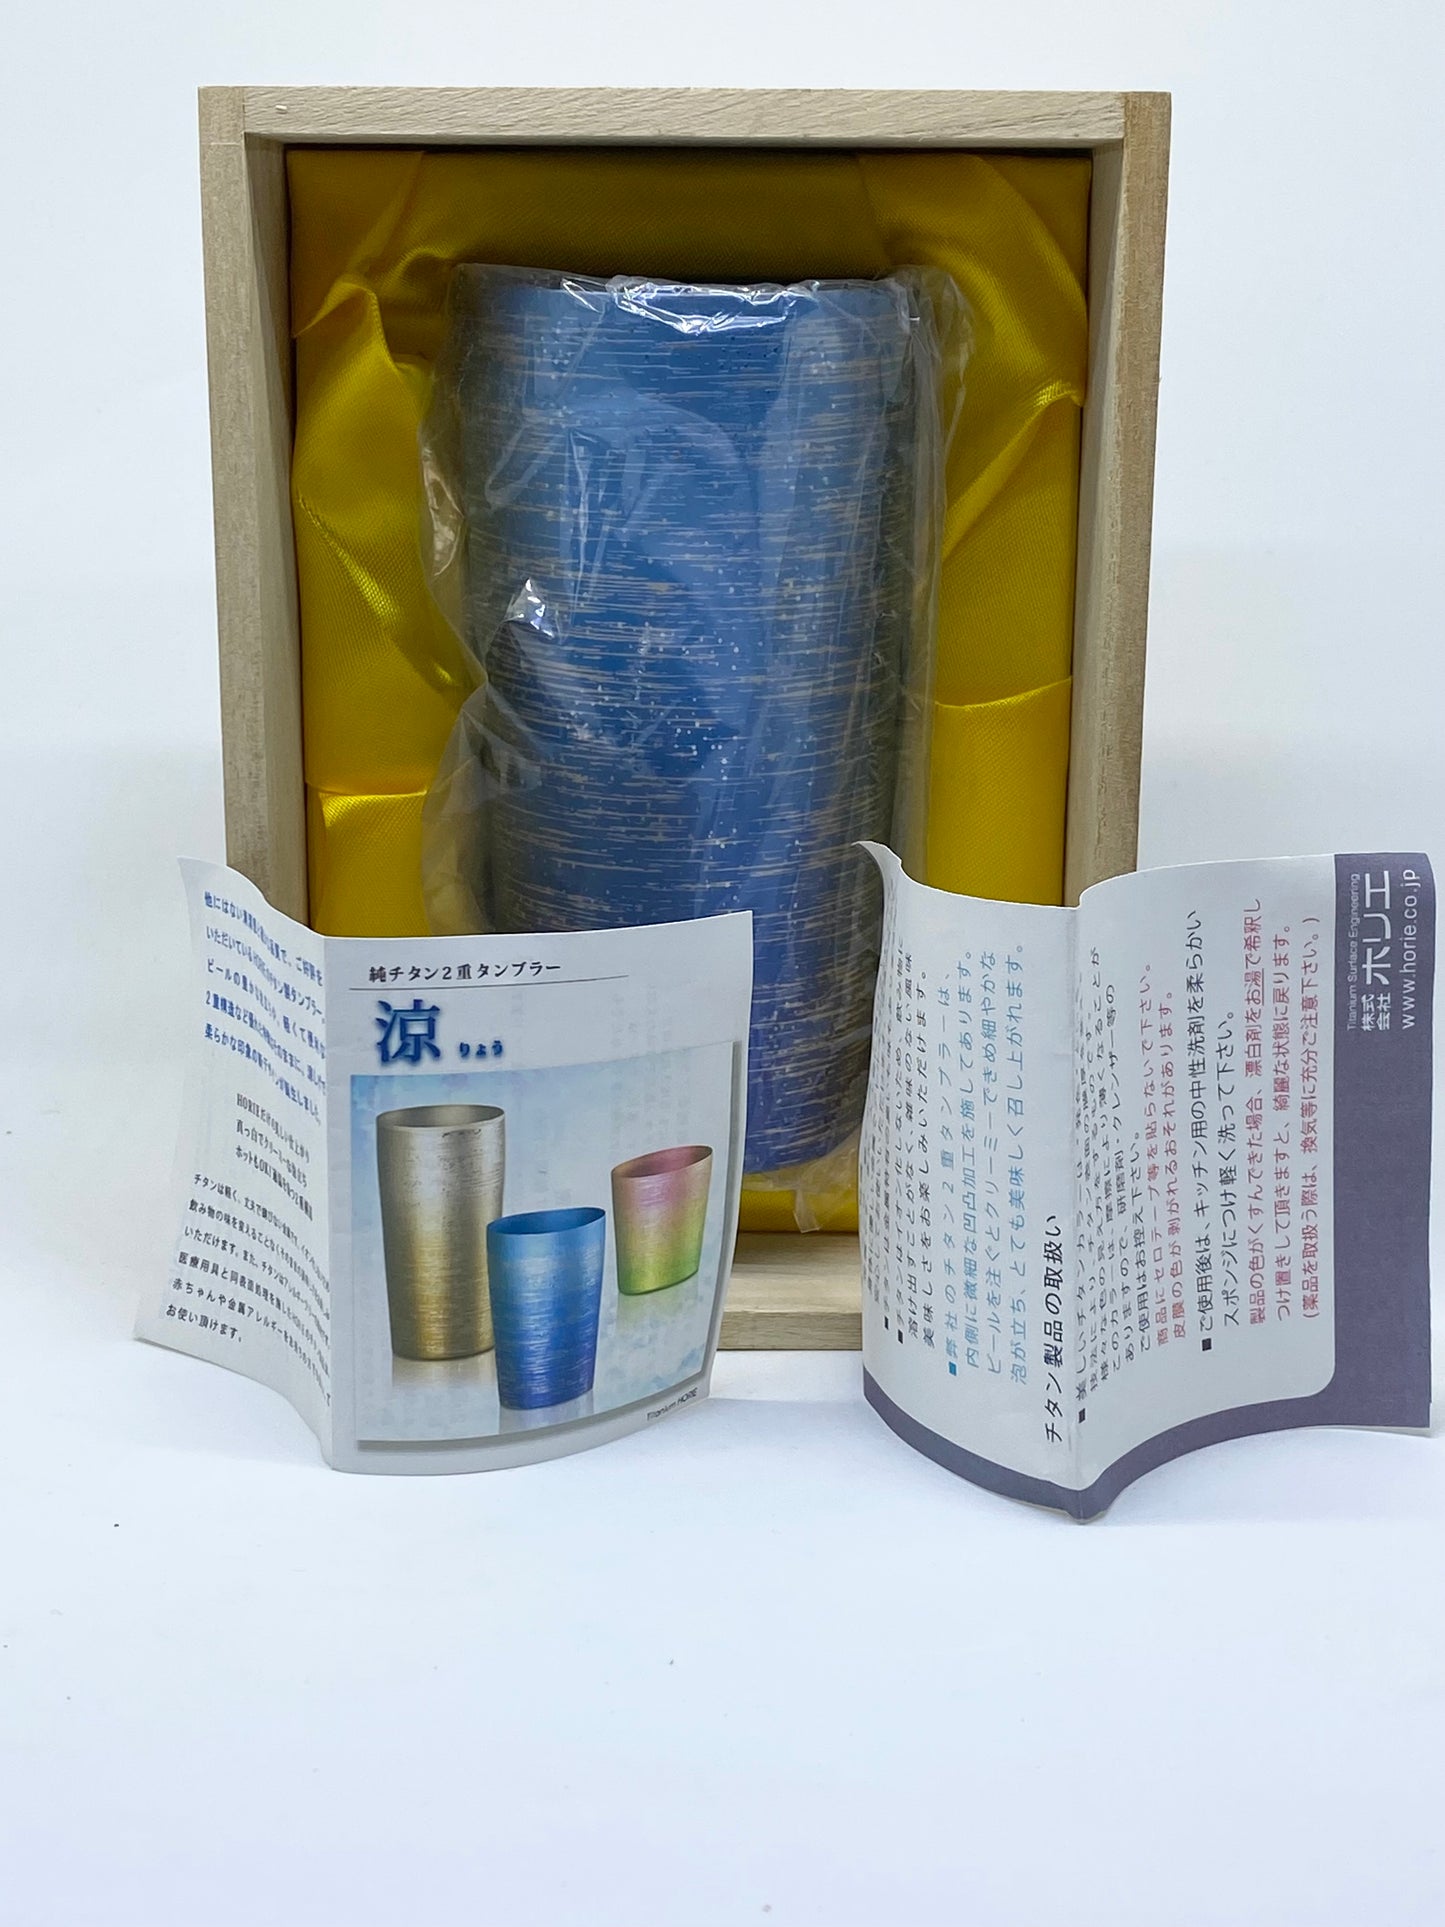 Highly collectable!! Japanese Horie Titanium Anodised Tumbler with original box and papers